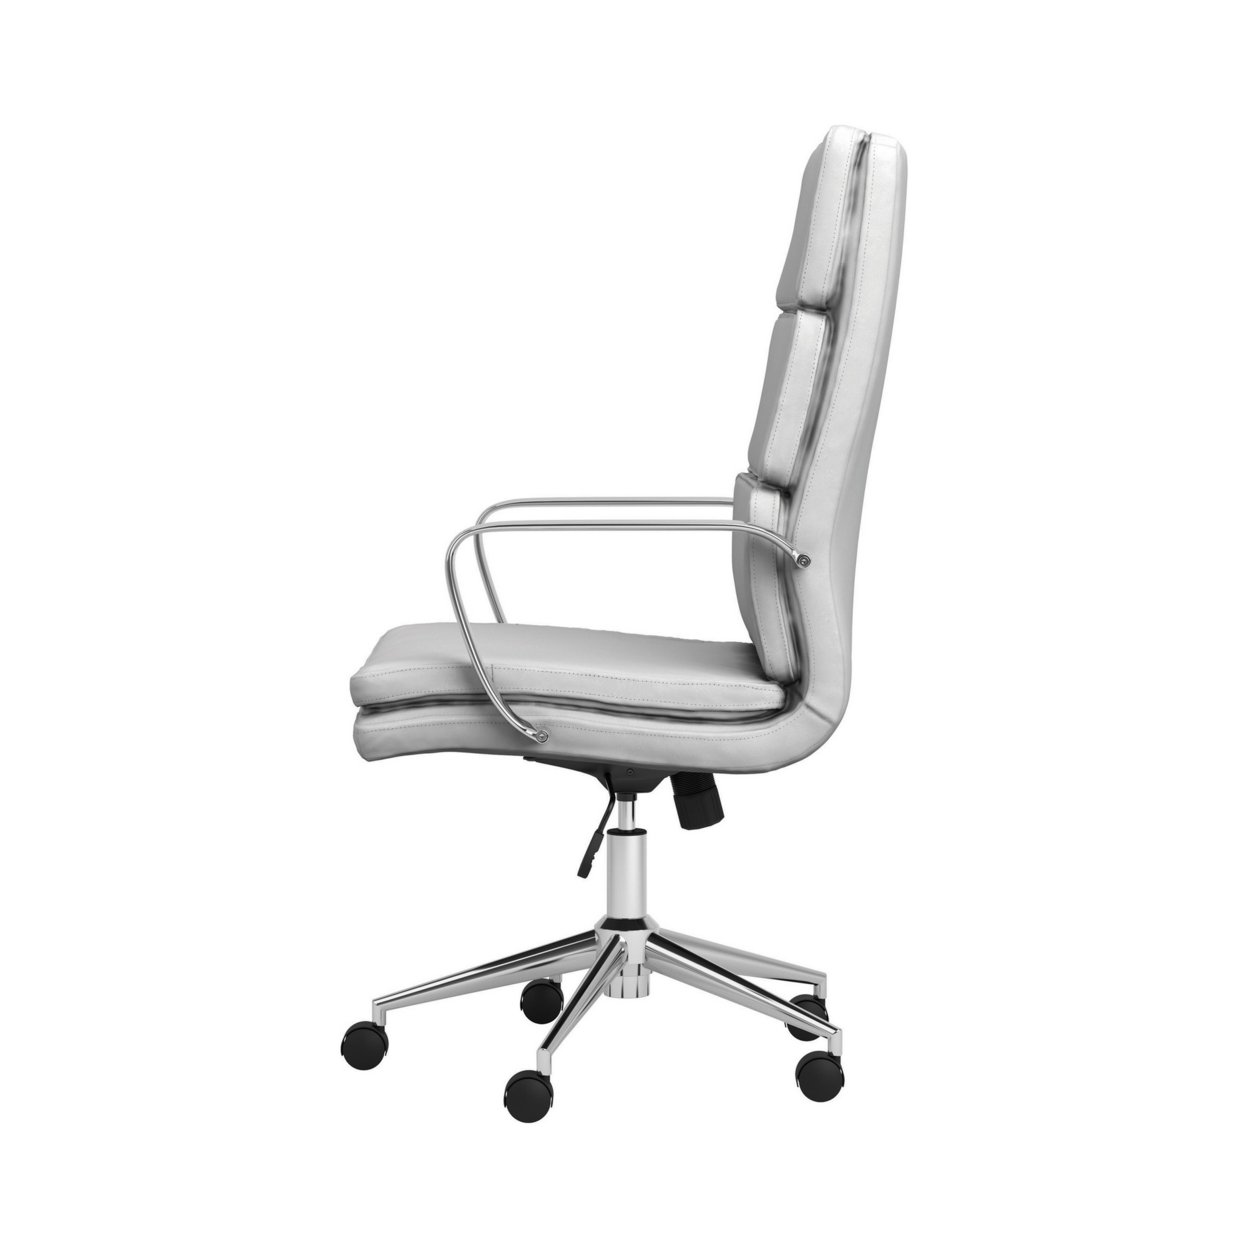 43 Inch Leatherette Office Chair With 5 Star Base, White- Saltoro Sherpi